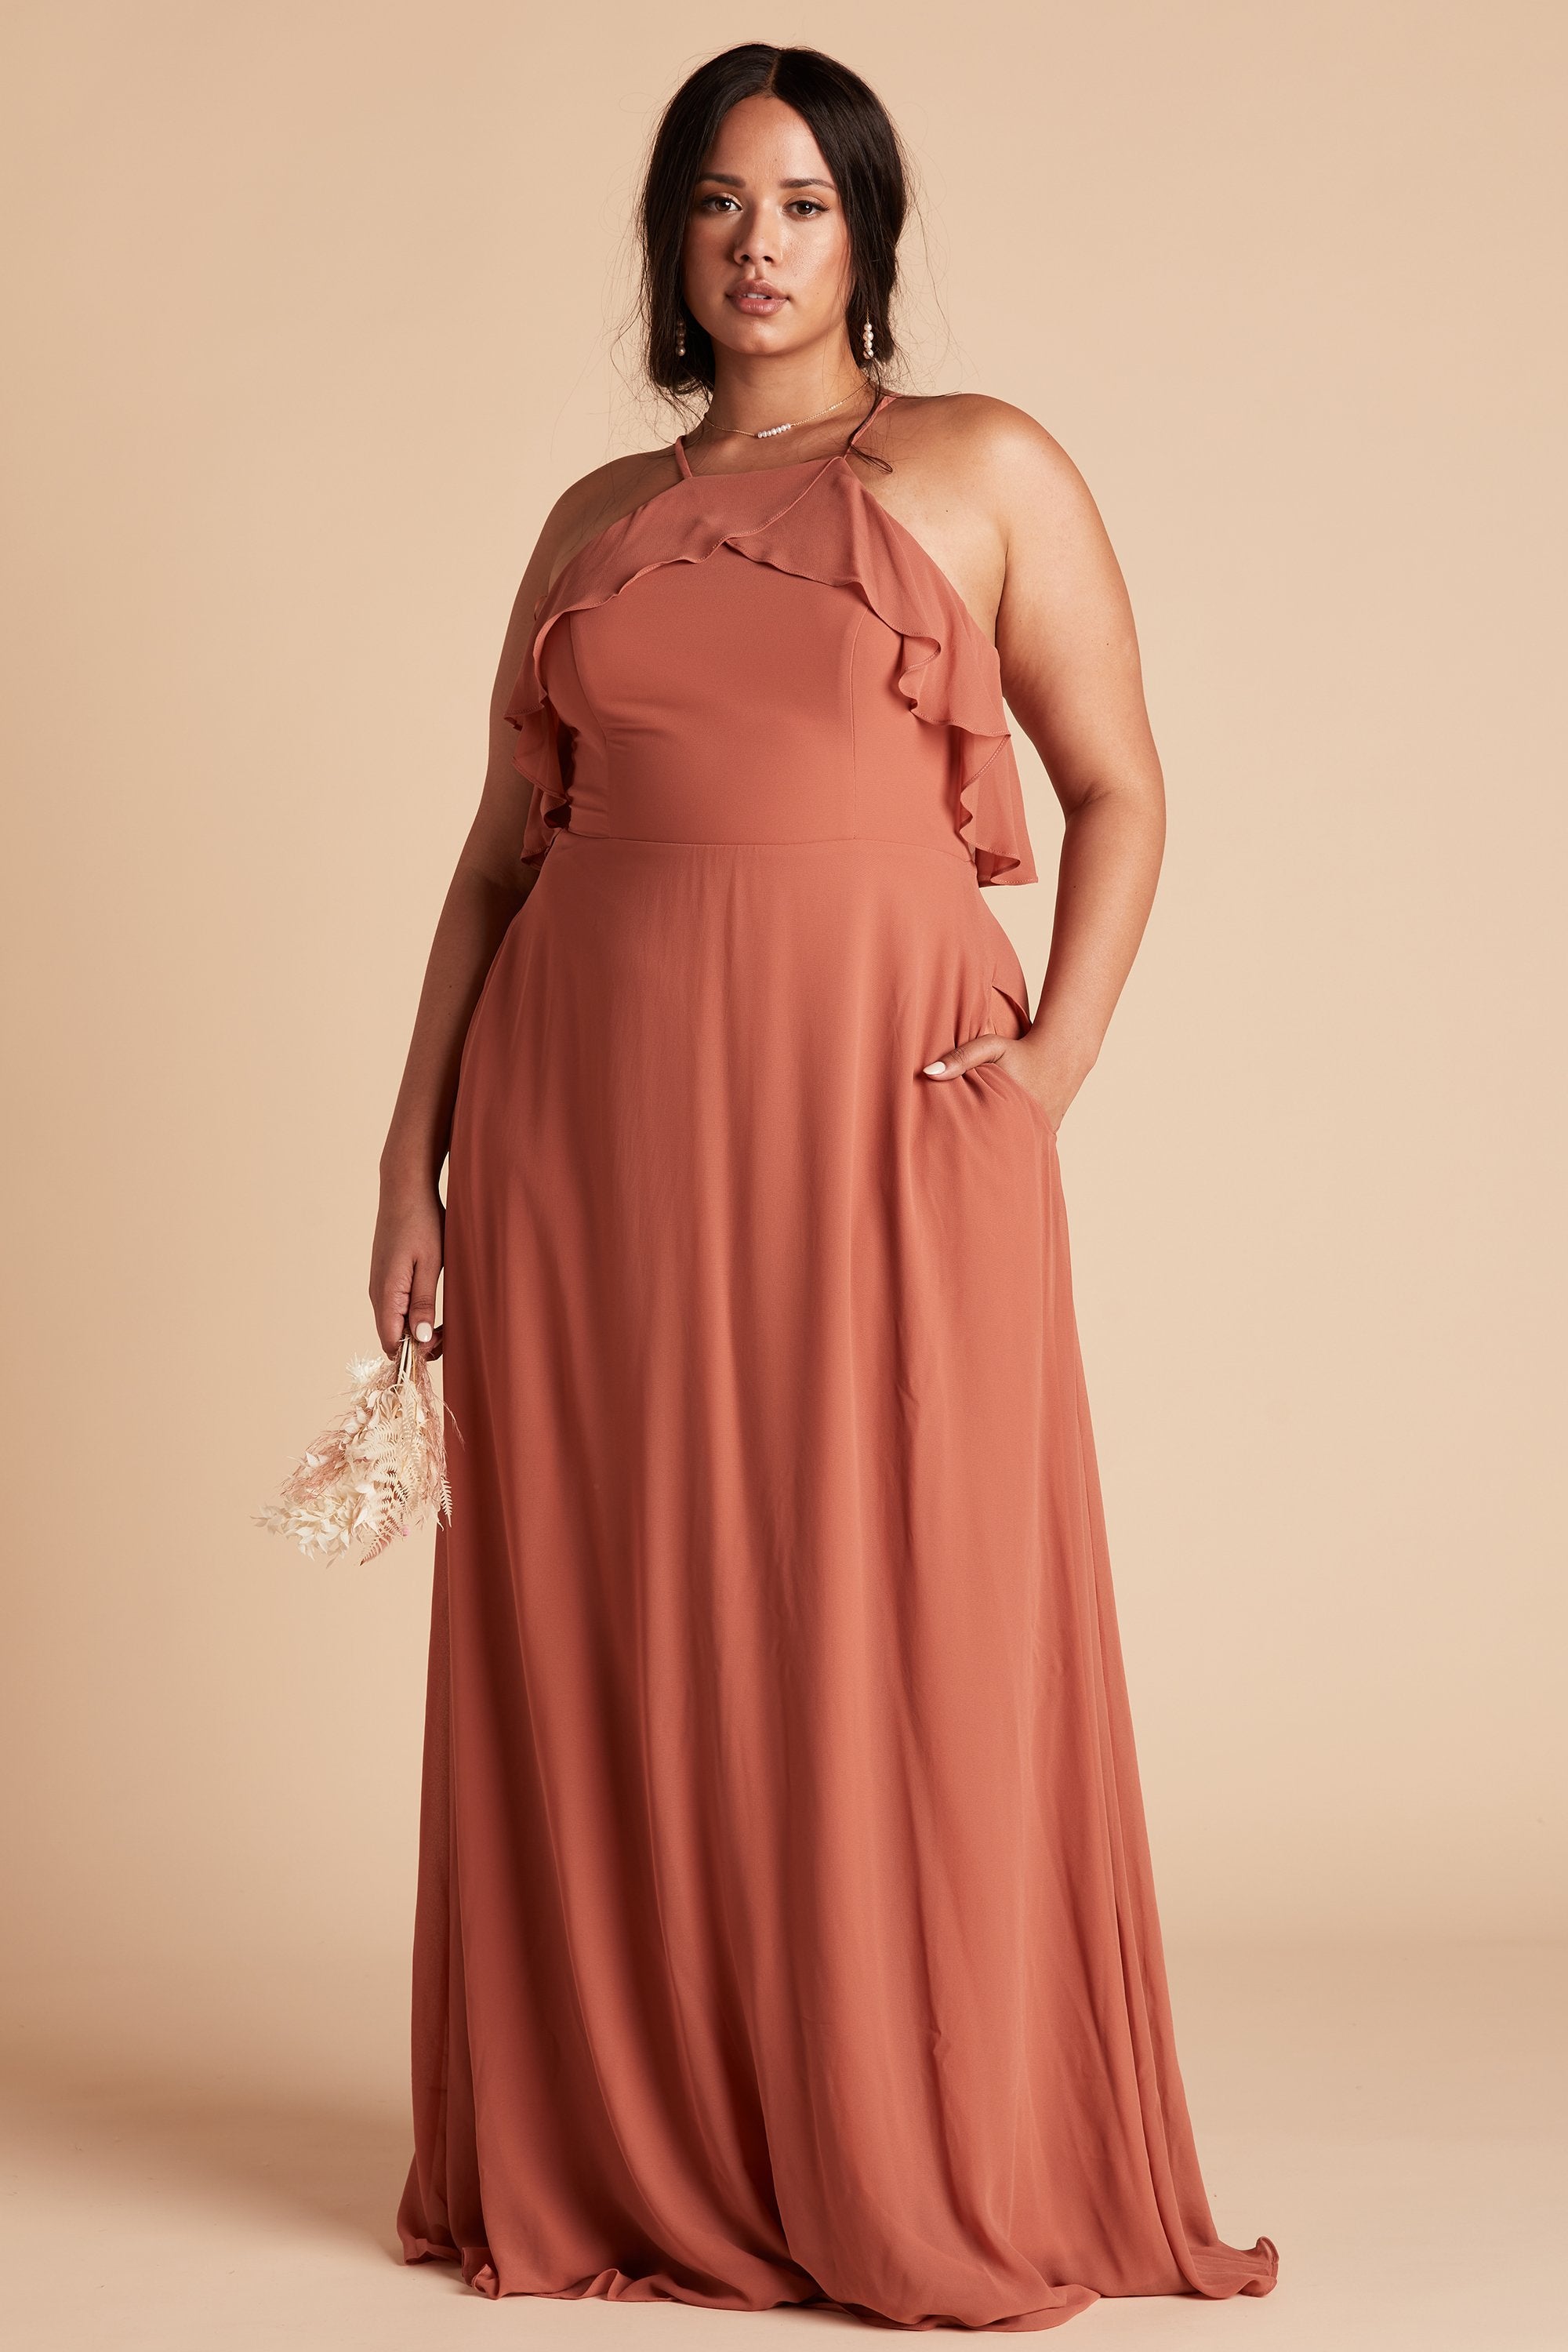 Jules plus size bridesmaid dress in terracotta orange chiffon by Birdy Grey, front view with hand in pocket